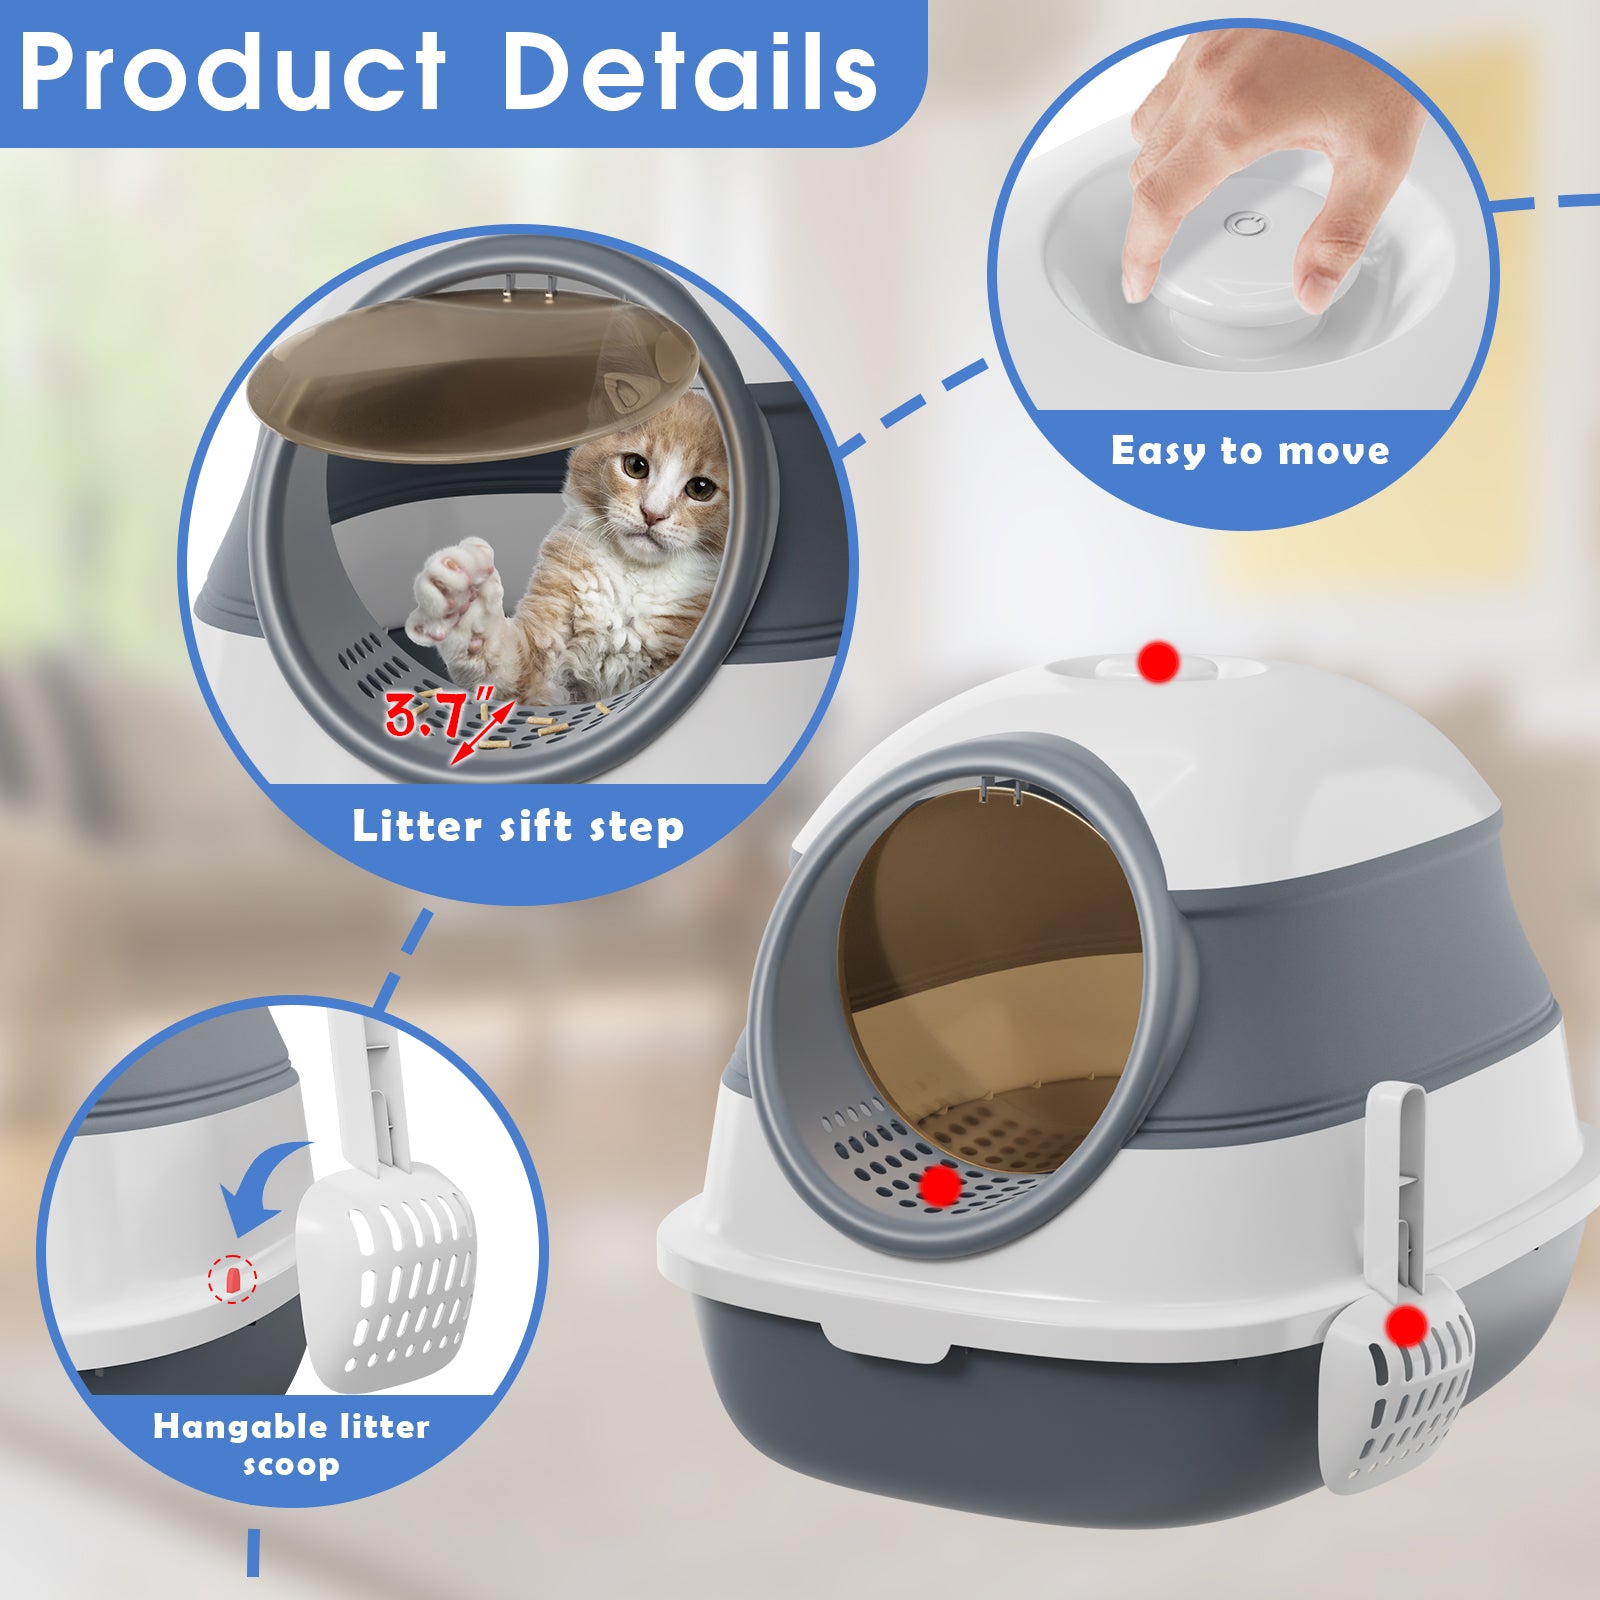  BNOSDM Collapsible Cat Litter Box for Kittens Small Shallow  Litter Boxes Open Standard Senior Cat Toilet Litter Tray Without Lid for  Travel : Pet Supplies